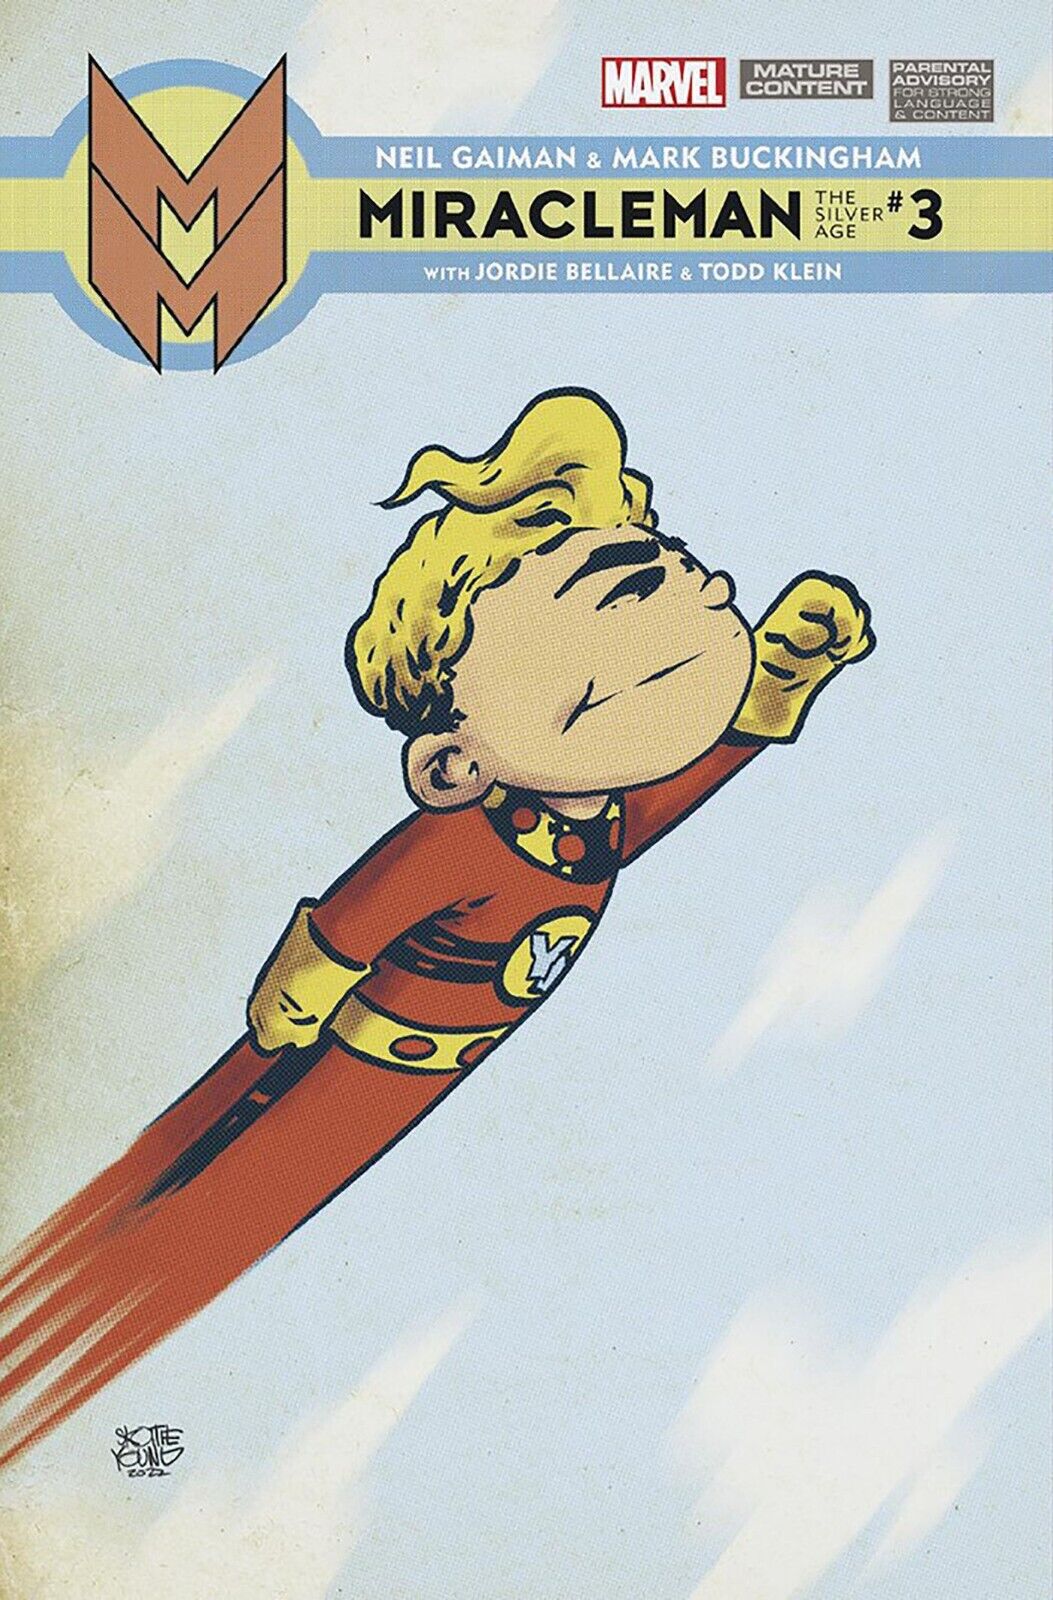 MIRACLEMAN: THE SILVER AGE #3 (SKOTTIE YOUNG VARIANT)(NEIL GAIMAN) ~ Marvel